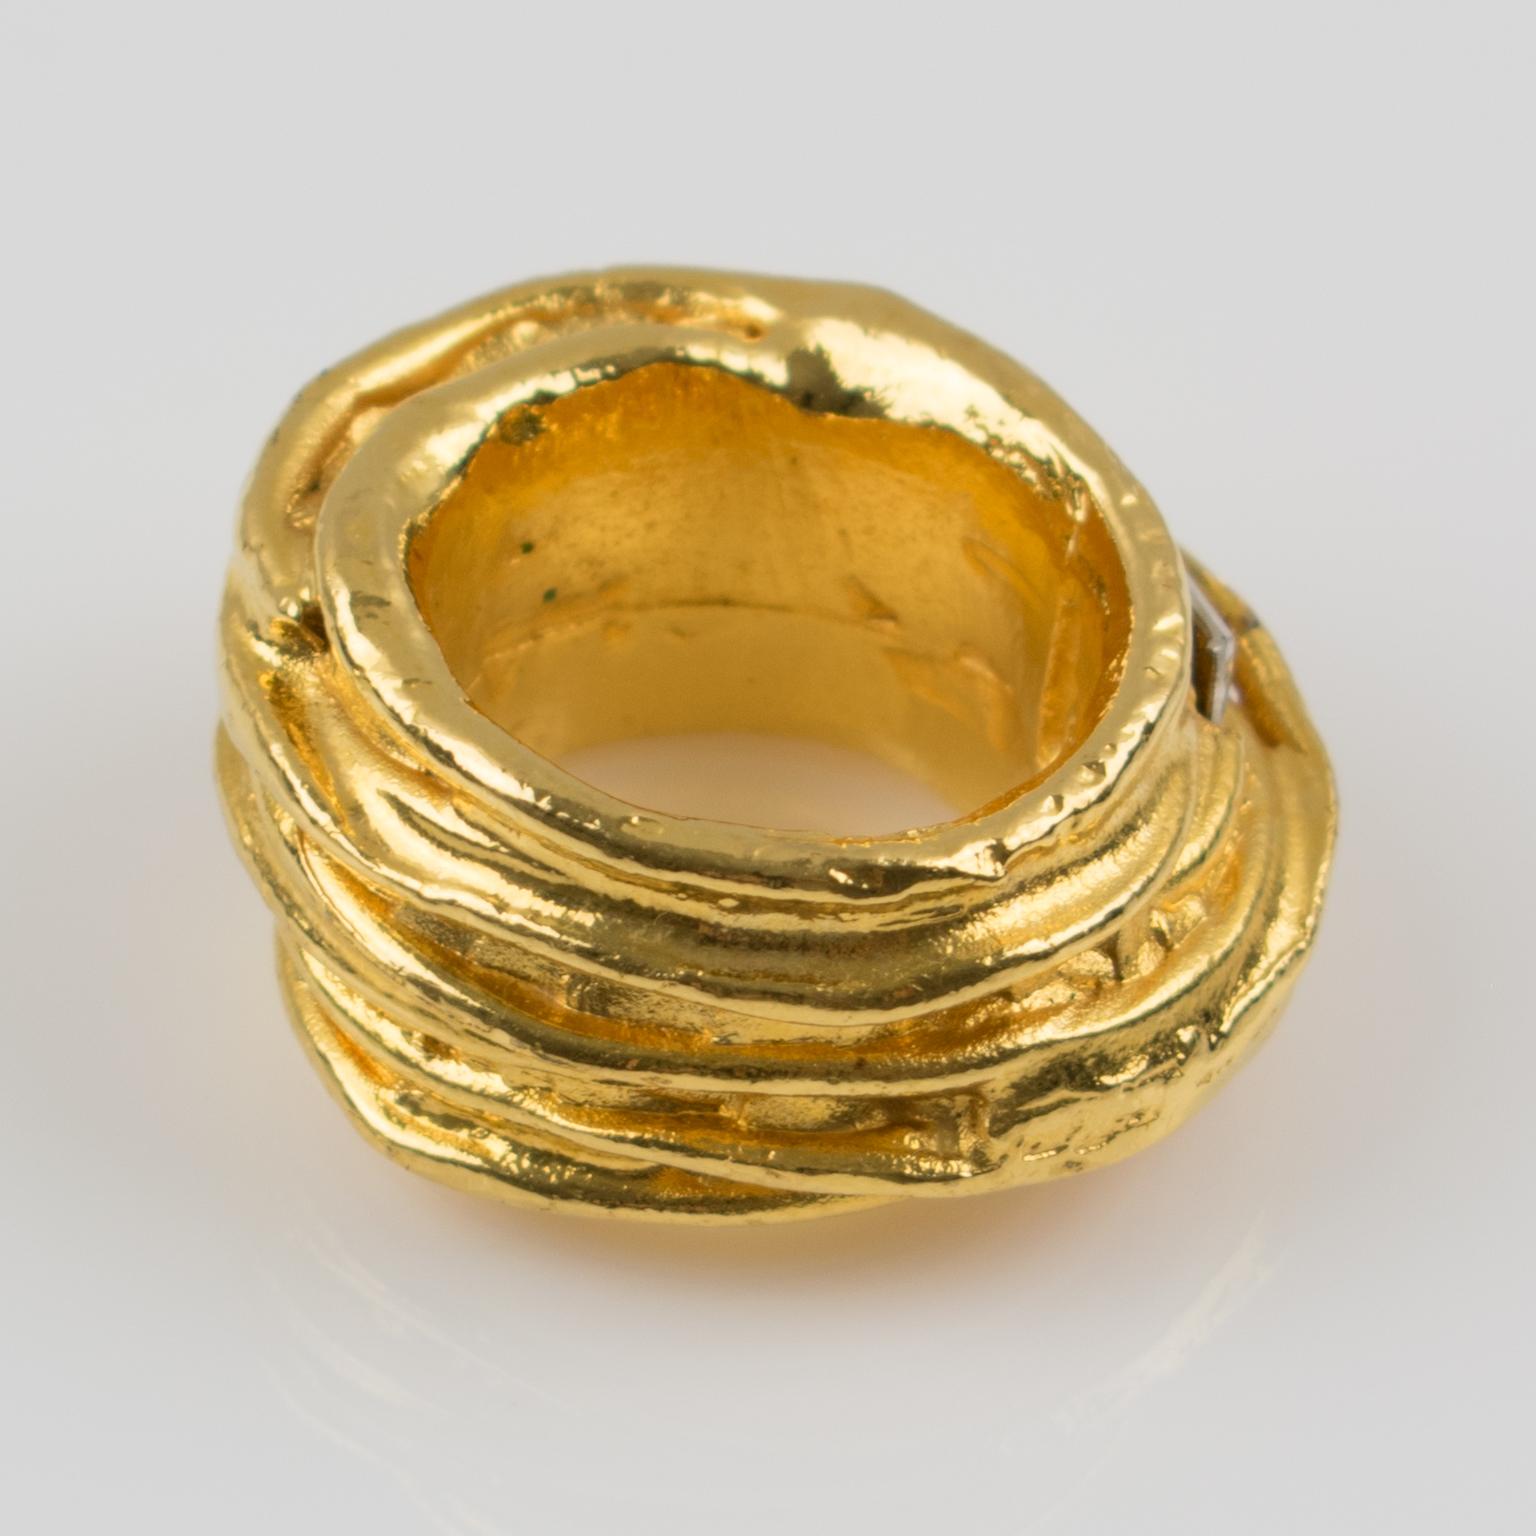 Elegant ridged baguette crystal ring by Christian Lacroix Paris. Large gold plated band shape with hammered and textured metal ornate with crystal rhinestones baguette of different sizes. Signed in the inside with the Lacroix logo. 
Measurements: